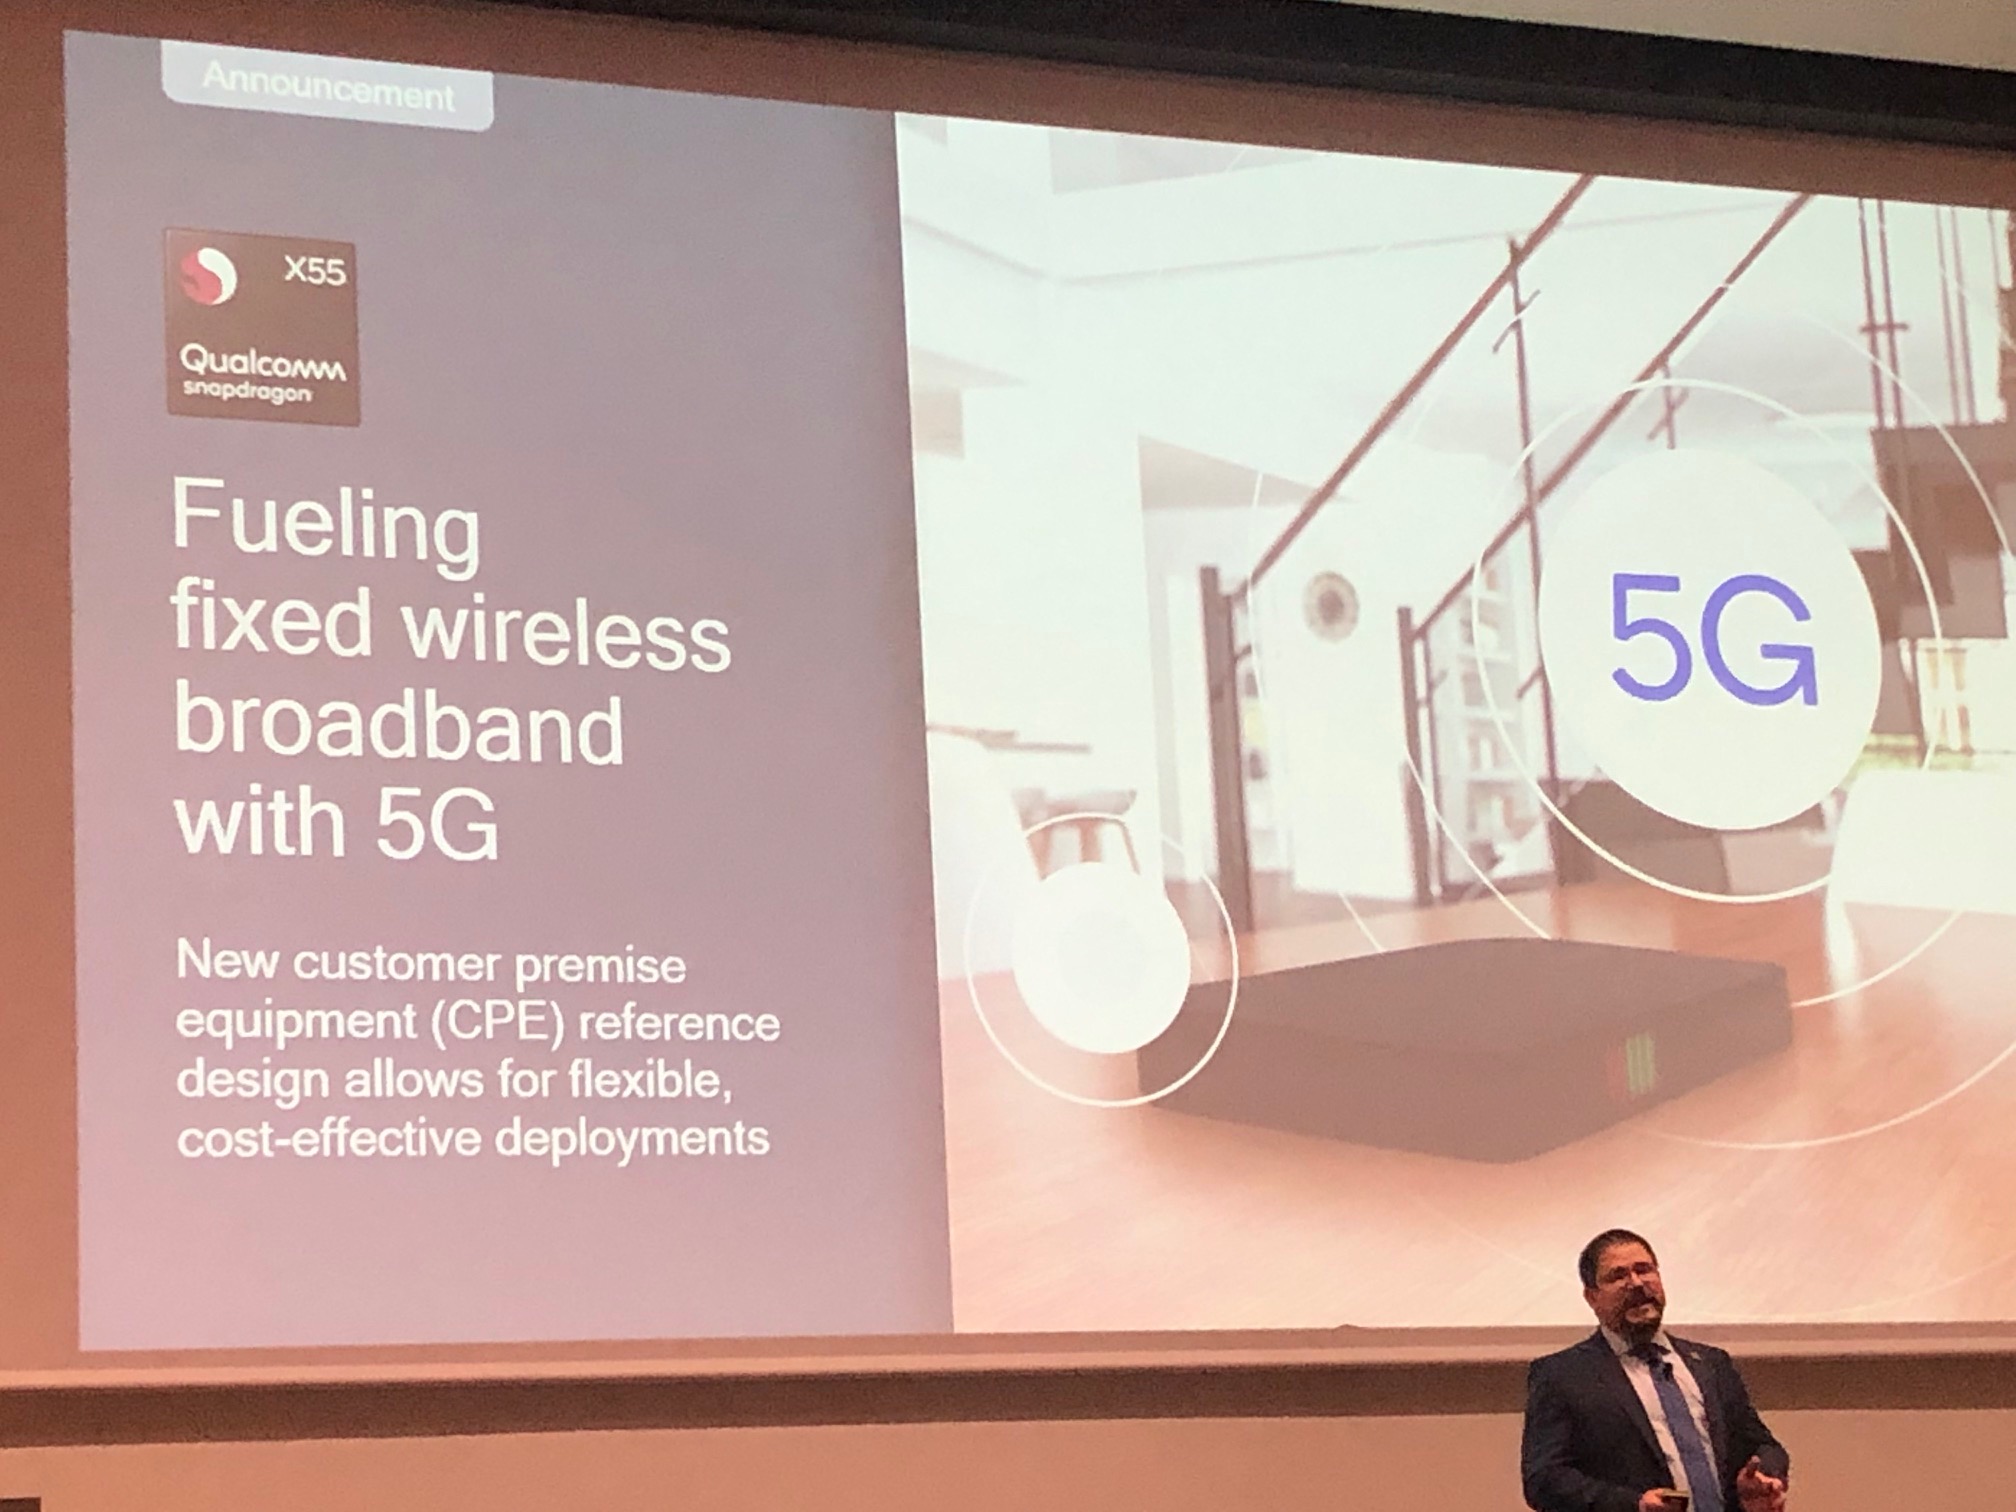 jammer gun owners should , Qualcomm Debuts CPE Reference Design for Fixed Wireless 5G Broadband